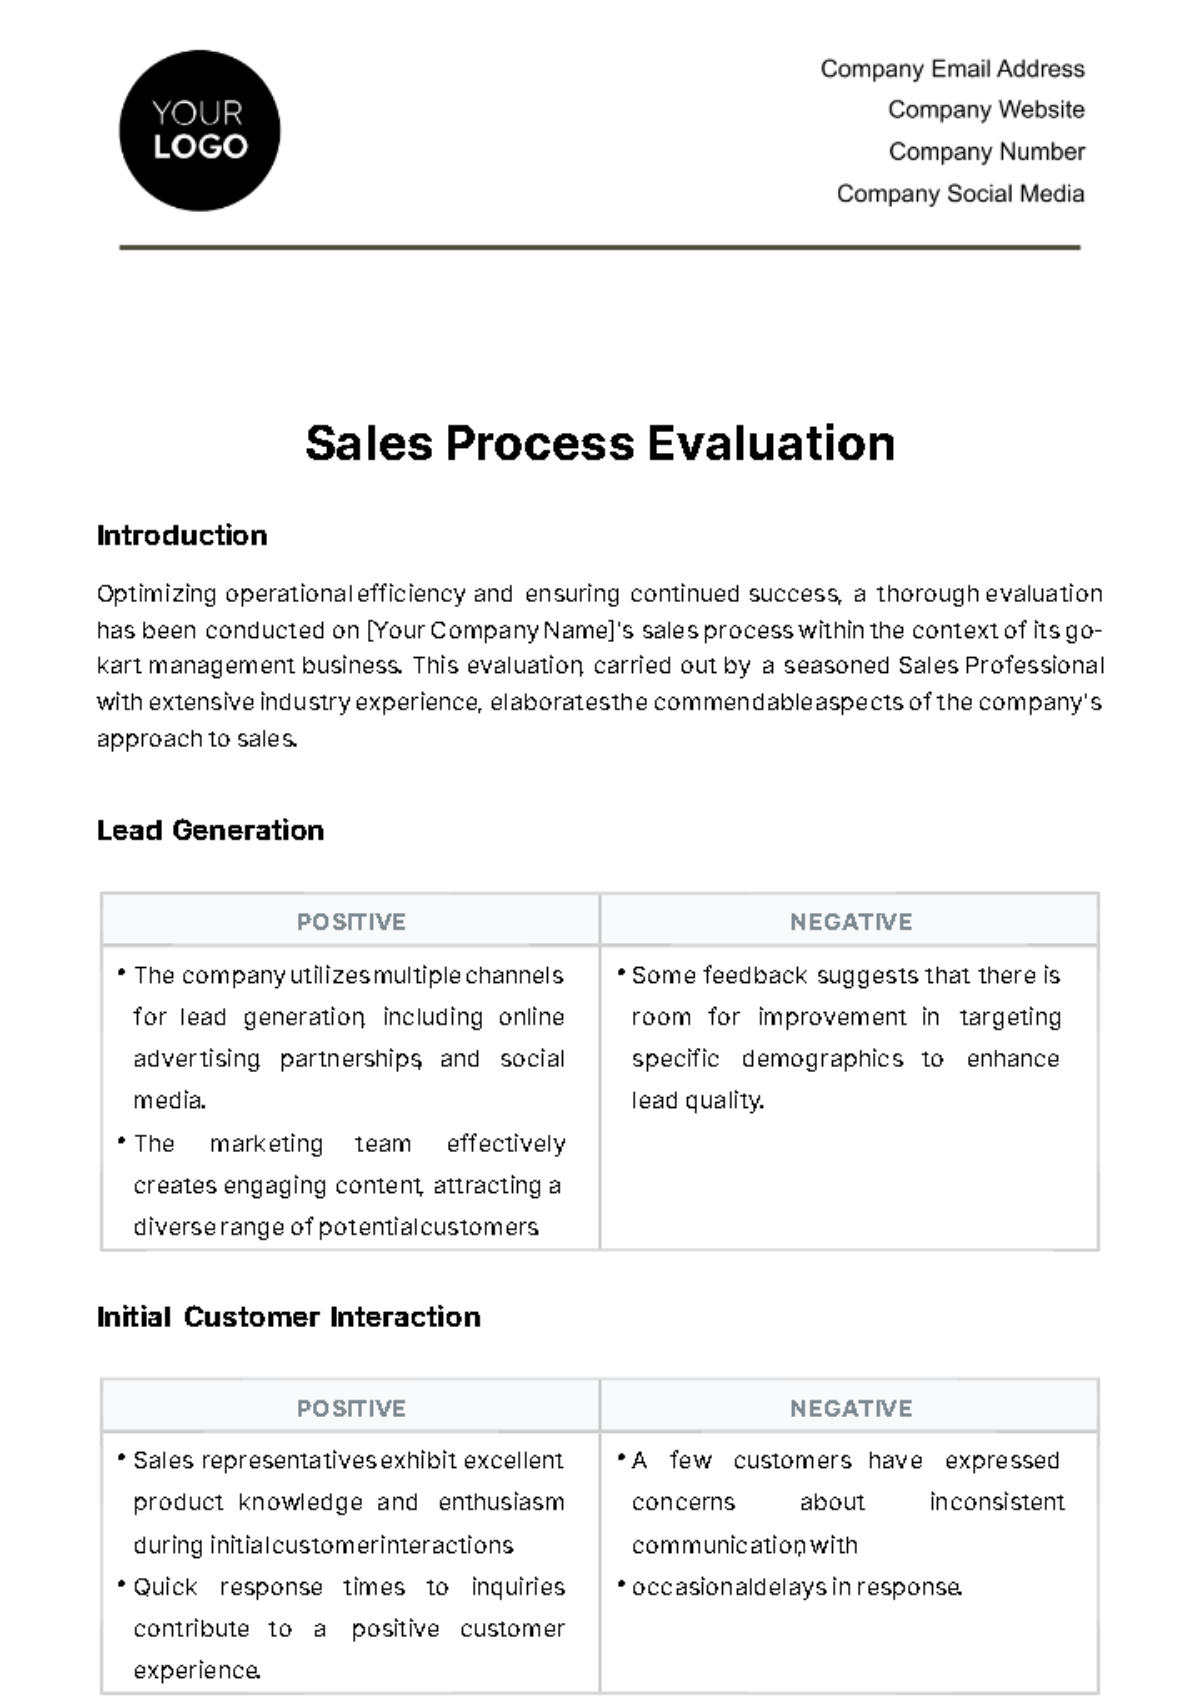 Free Sales Process Evaluation Template